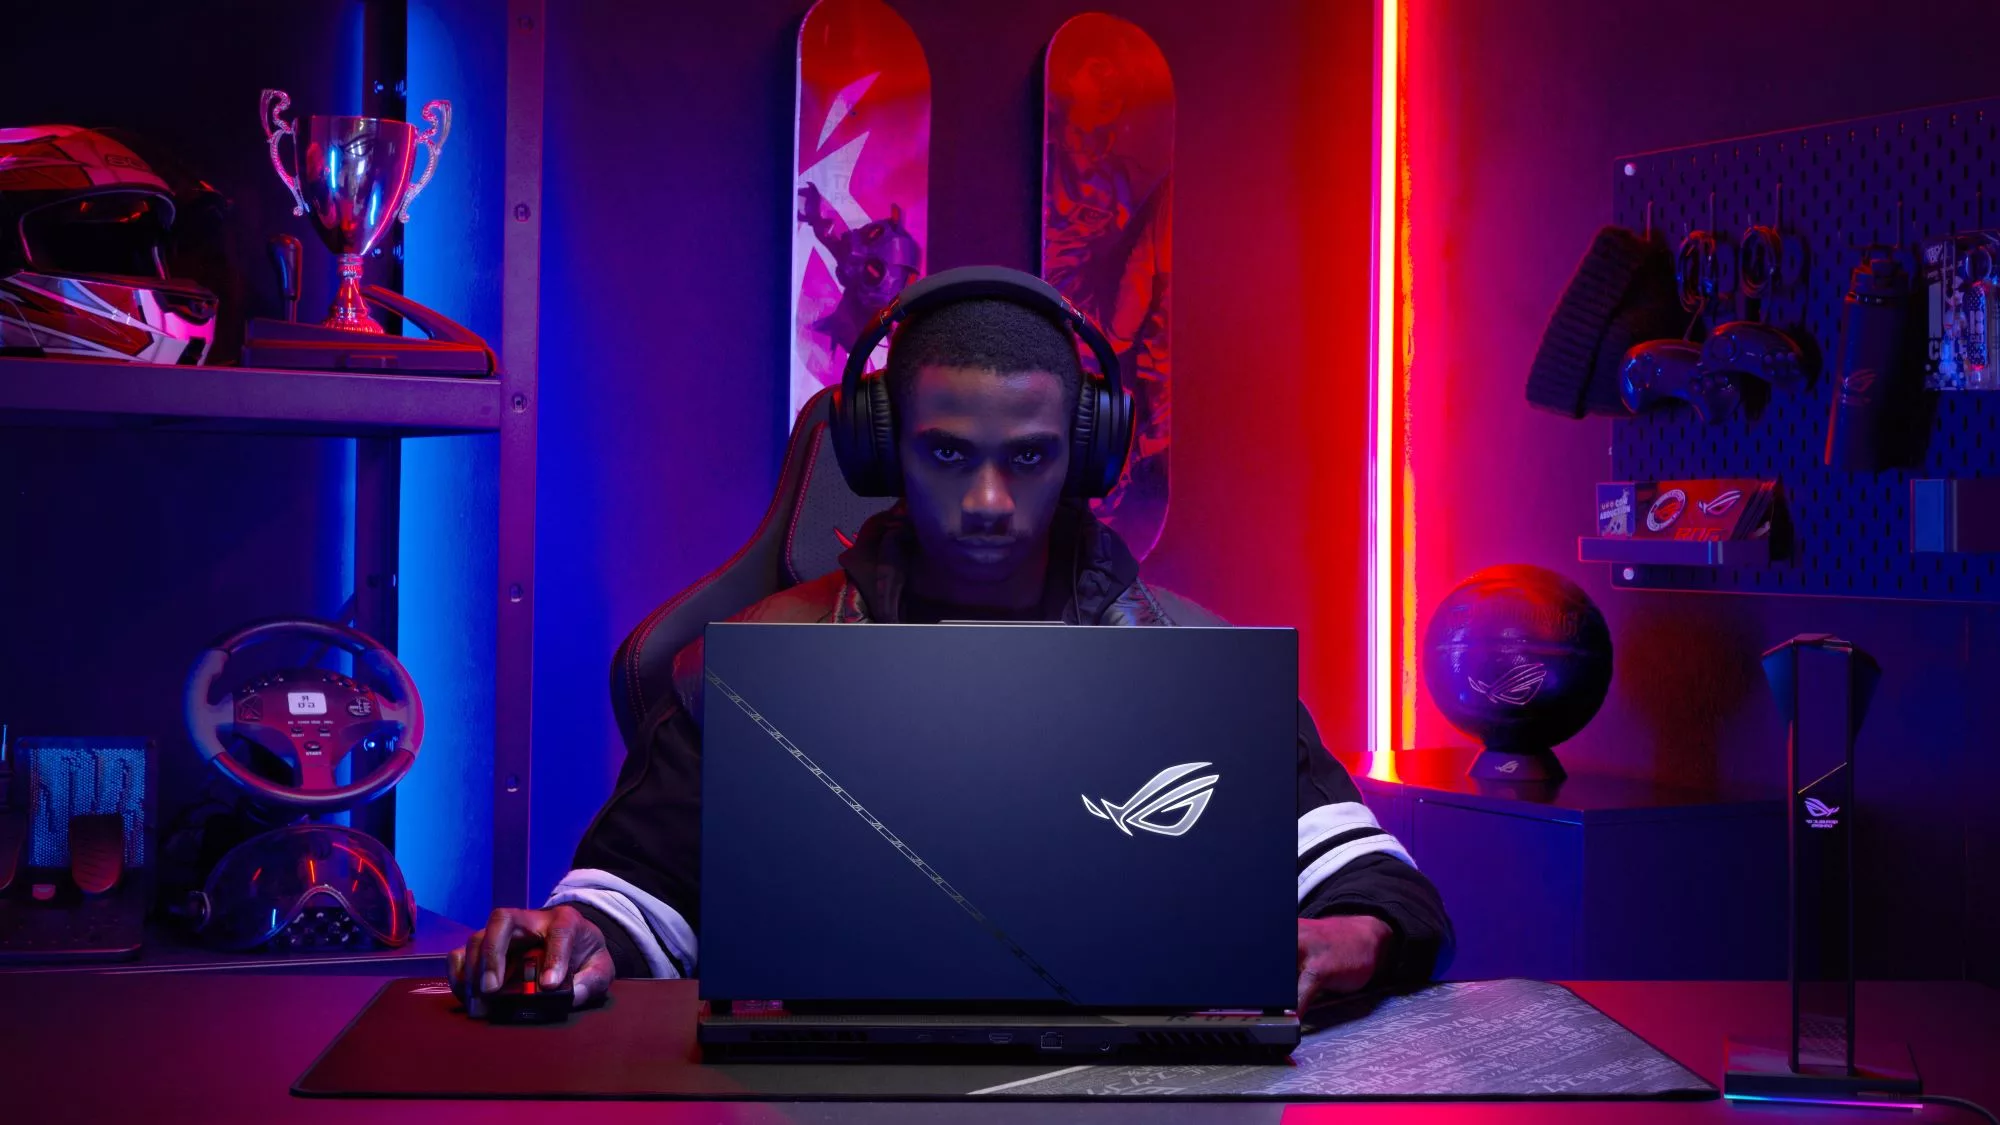 A man looking at the ROG Strix SCAR 17 laptop in a dark room, with the ROG logo visible on the laptop's lid.